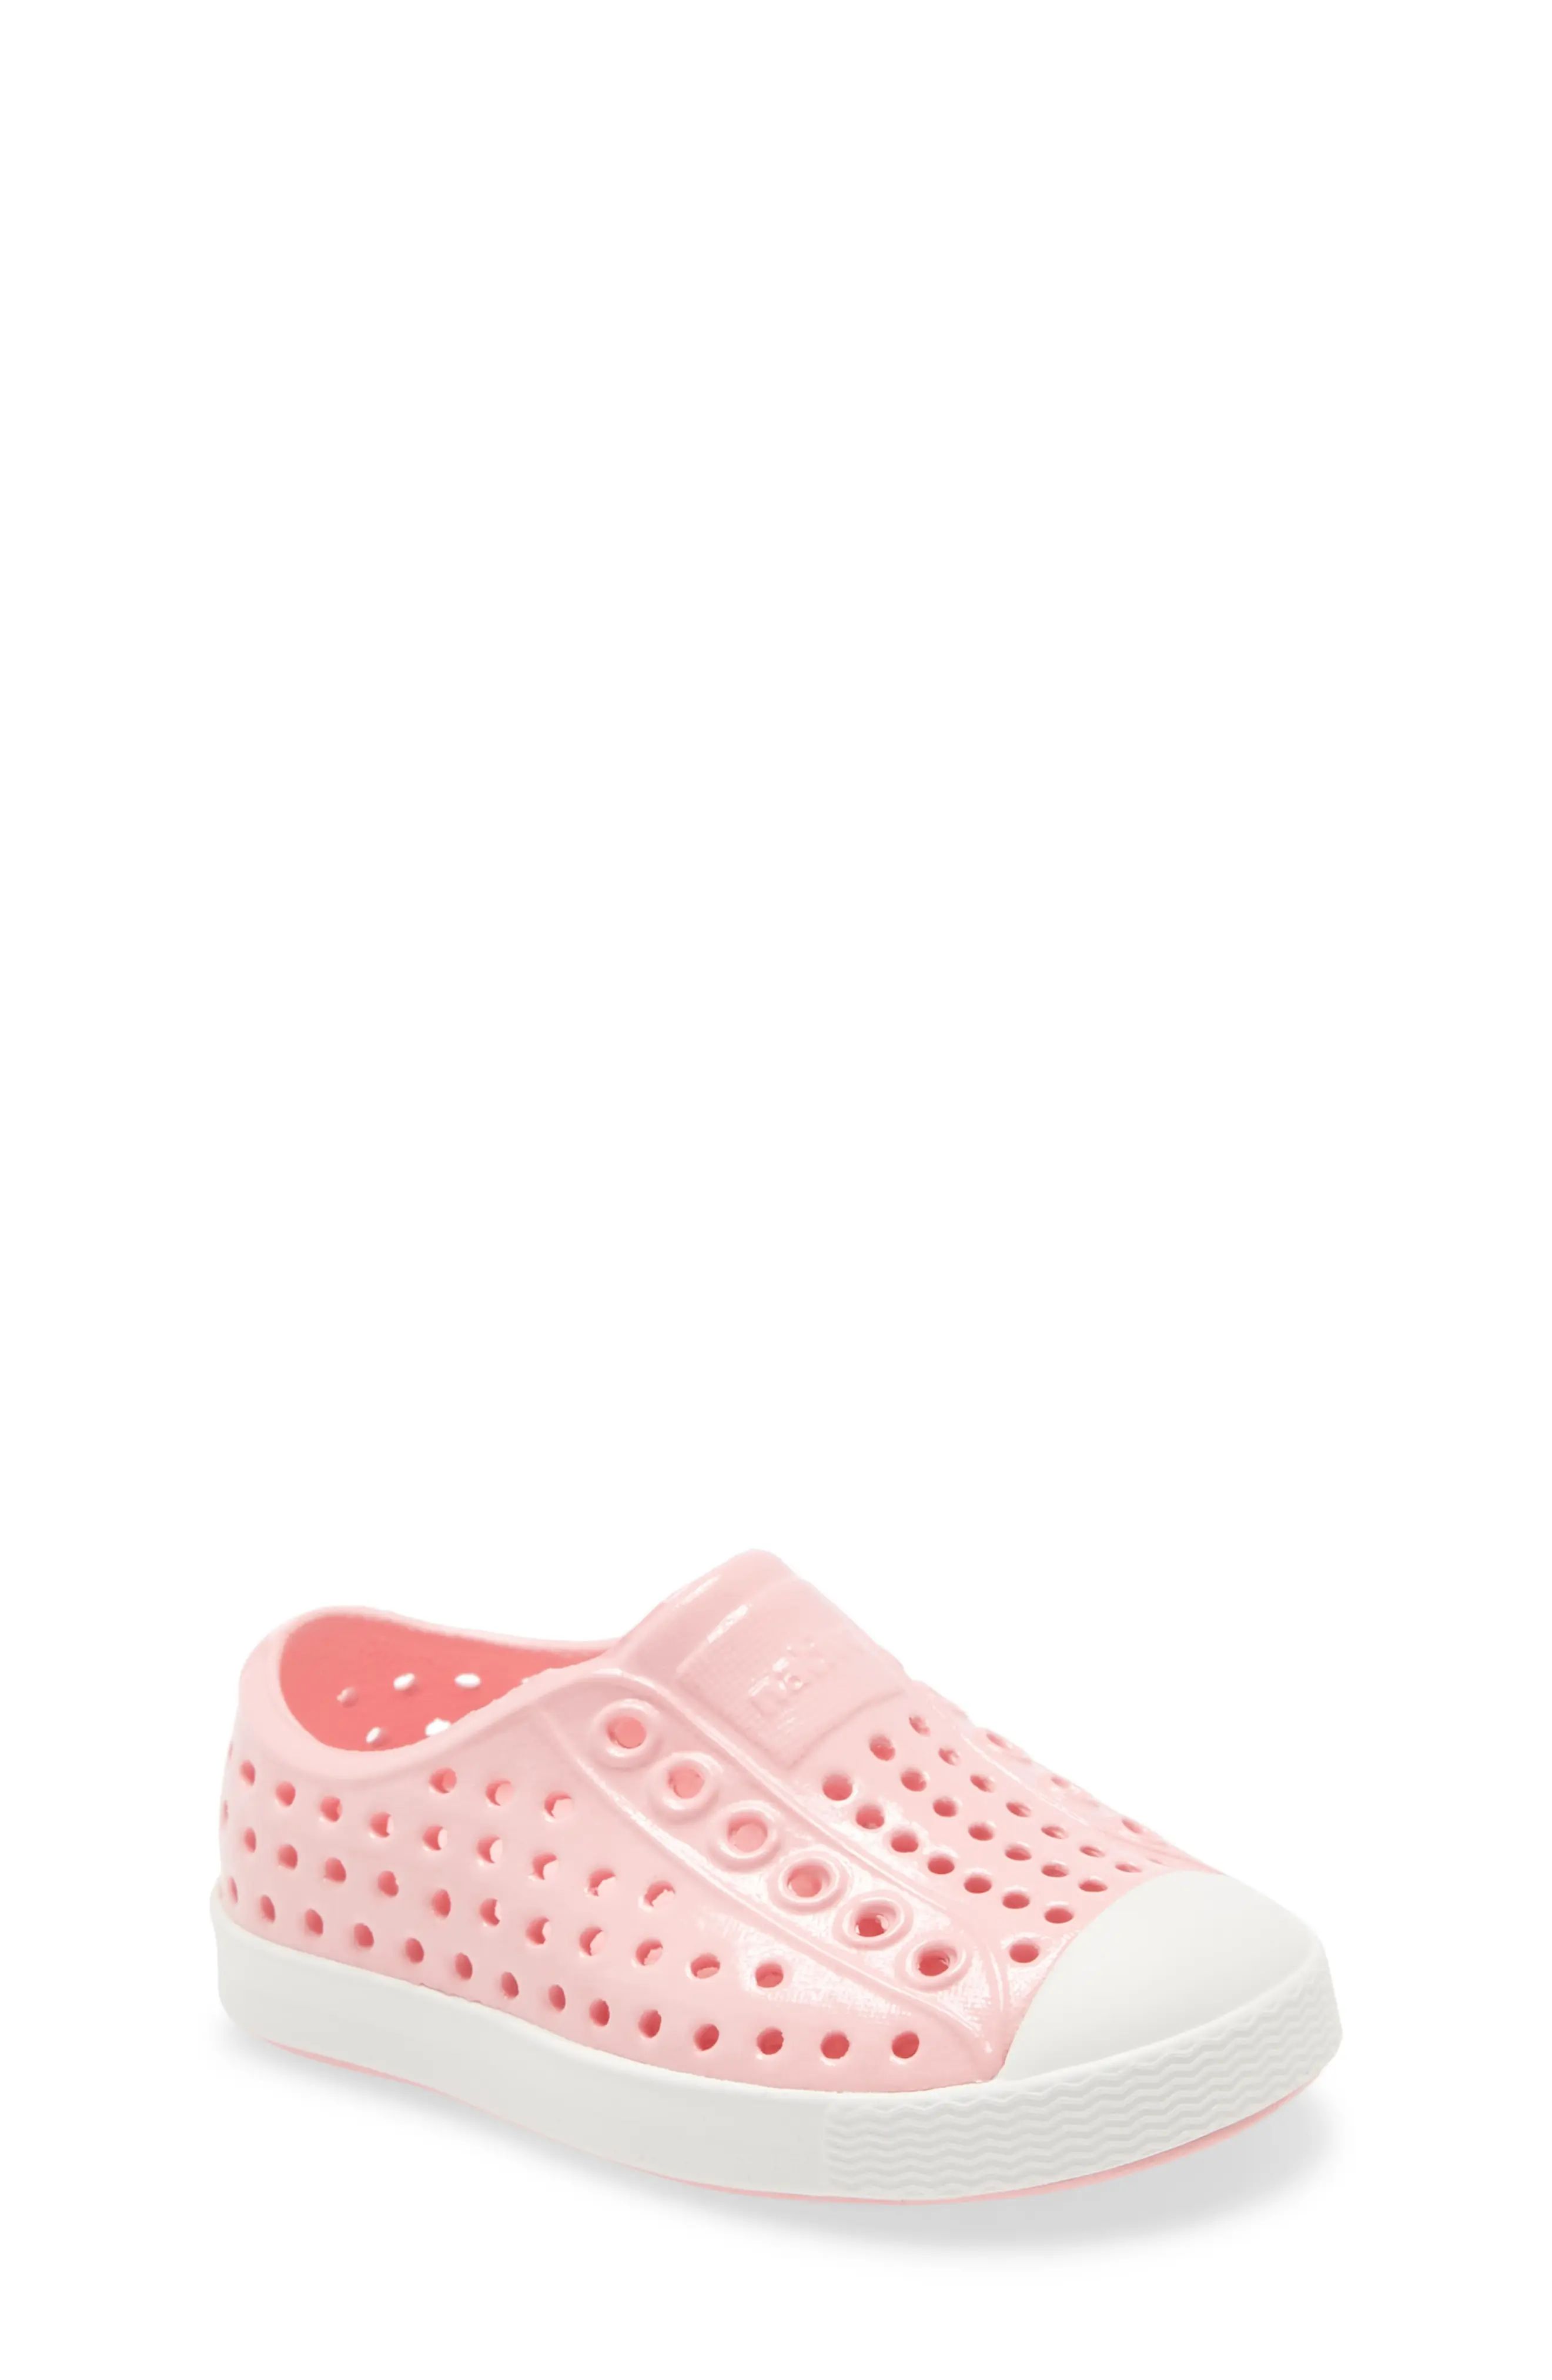 Toddler Girl's Native Shoes Jefferson Glossy Slip-On Sneaker, Size 5 M - Pink | Nordstrom